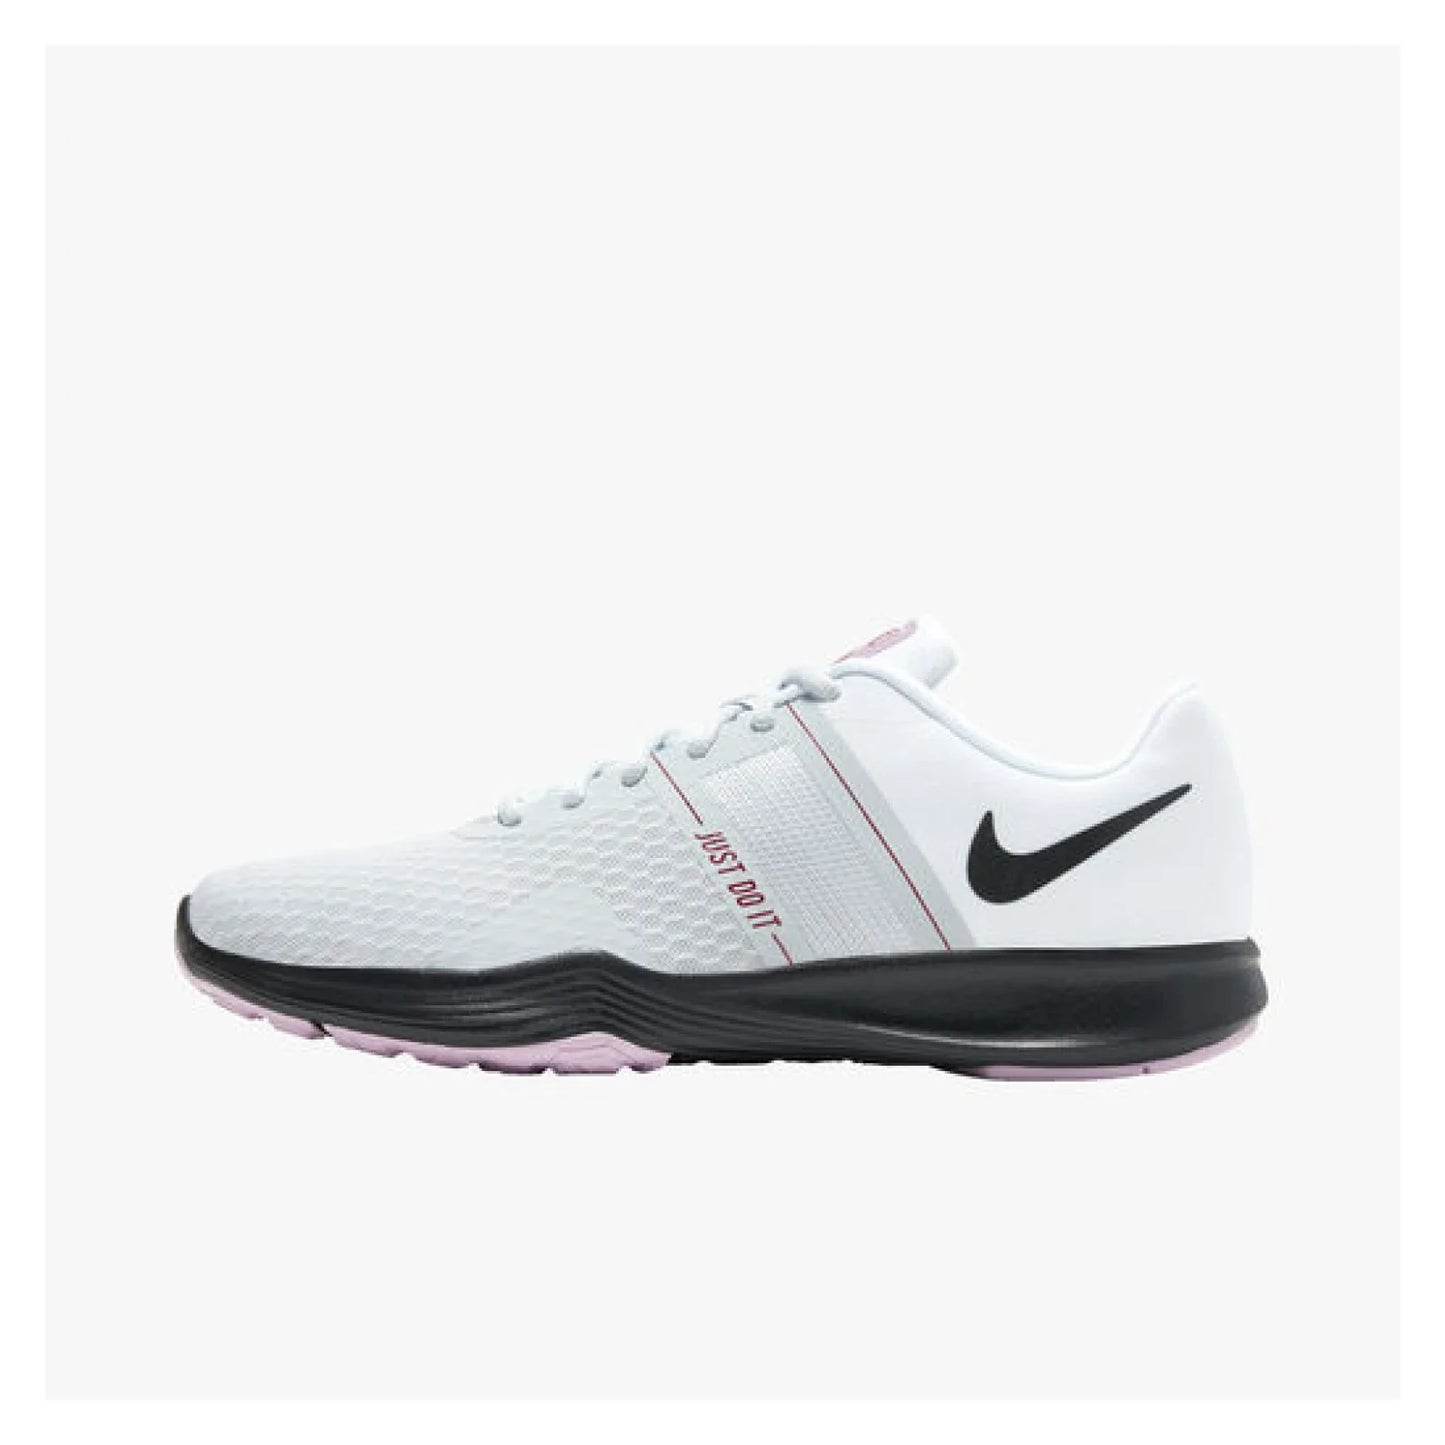 Nike WMNS City Trainer 2 Mujer